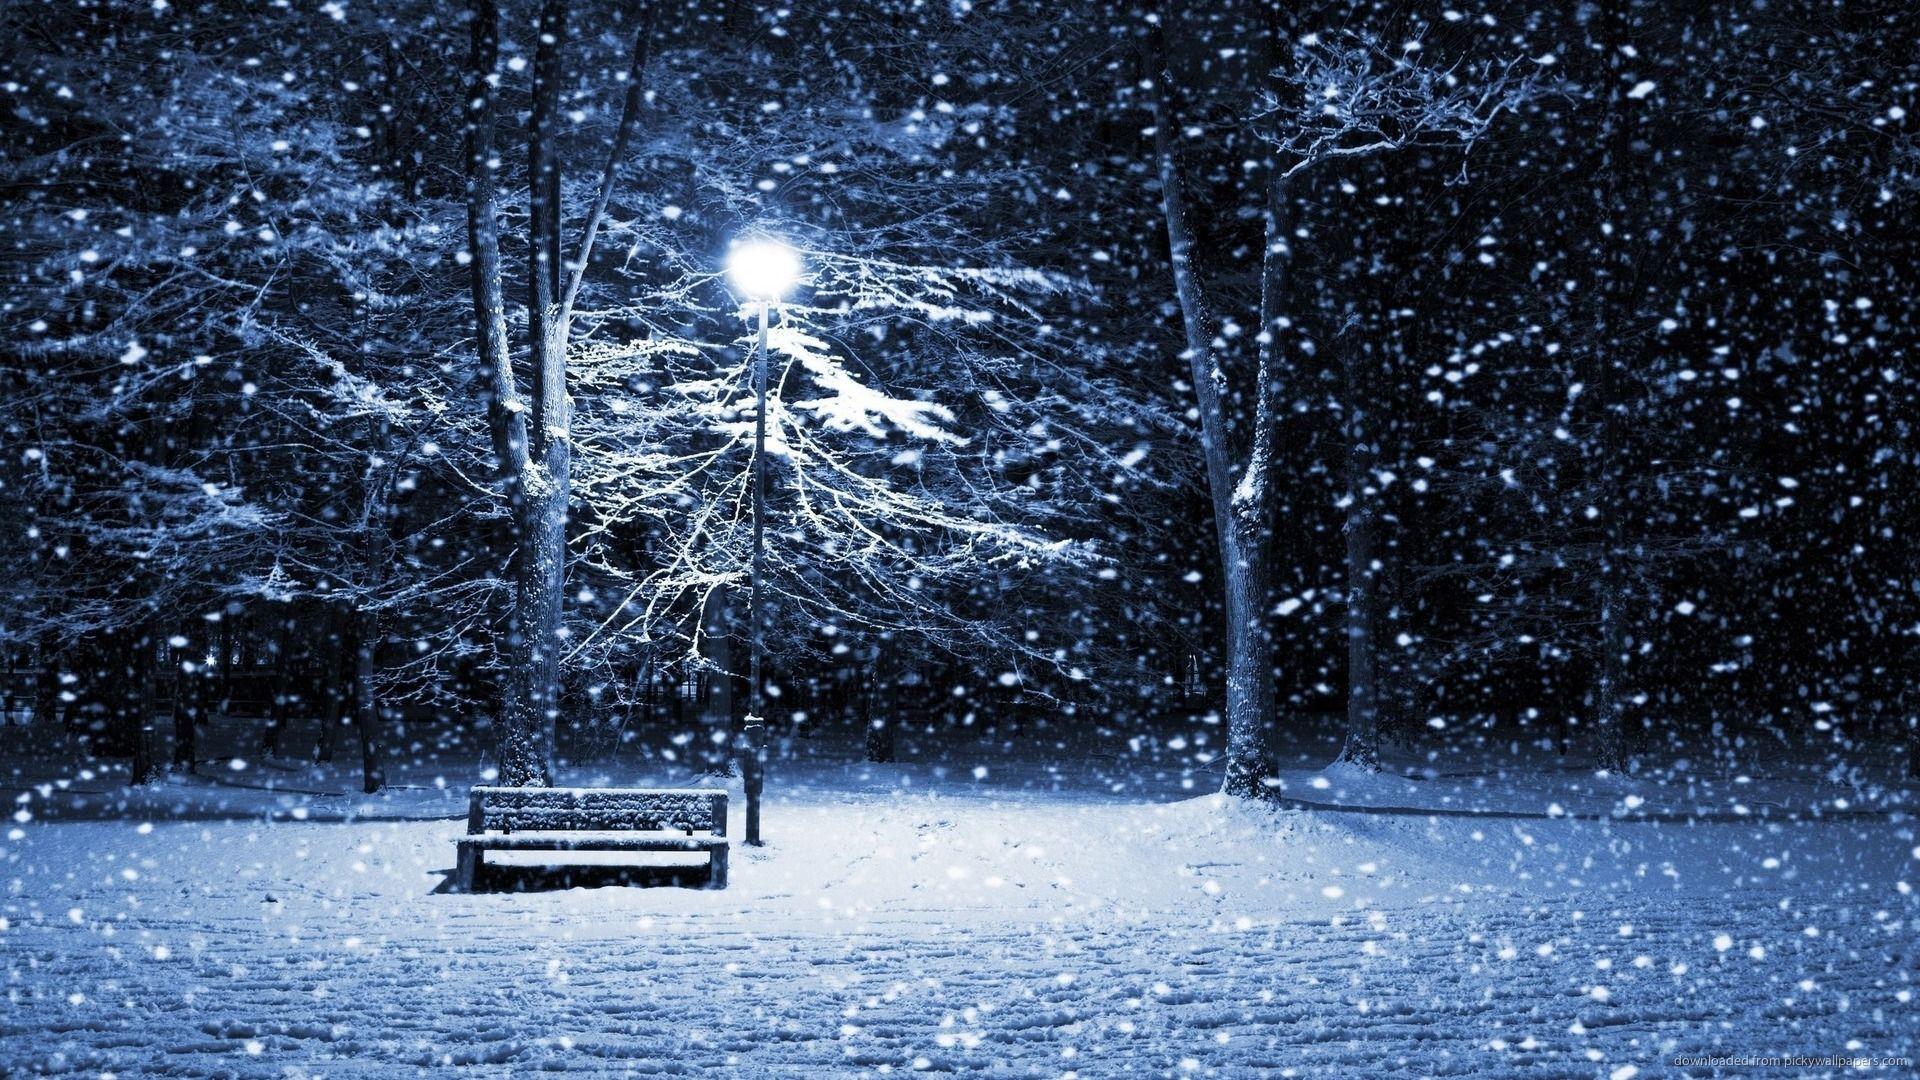 Download 1920x1080 Winter Street With Bench And Lamp Post Wallpapers